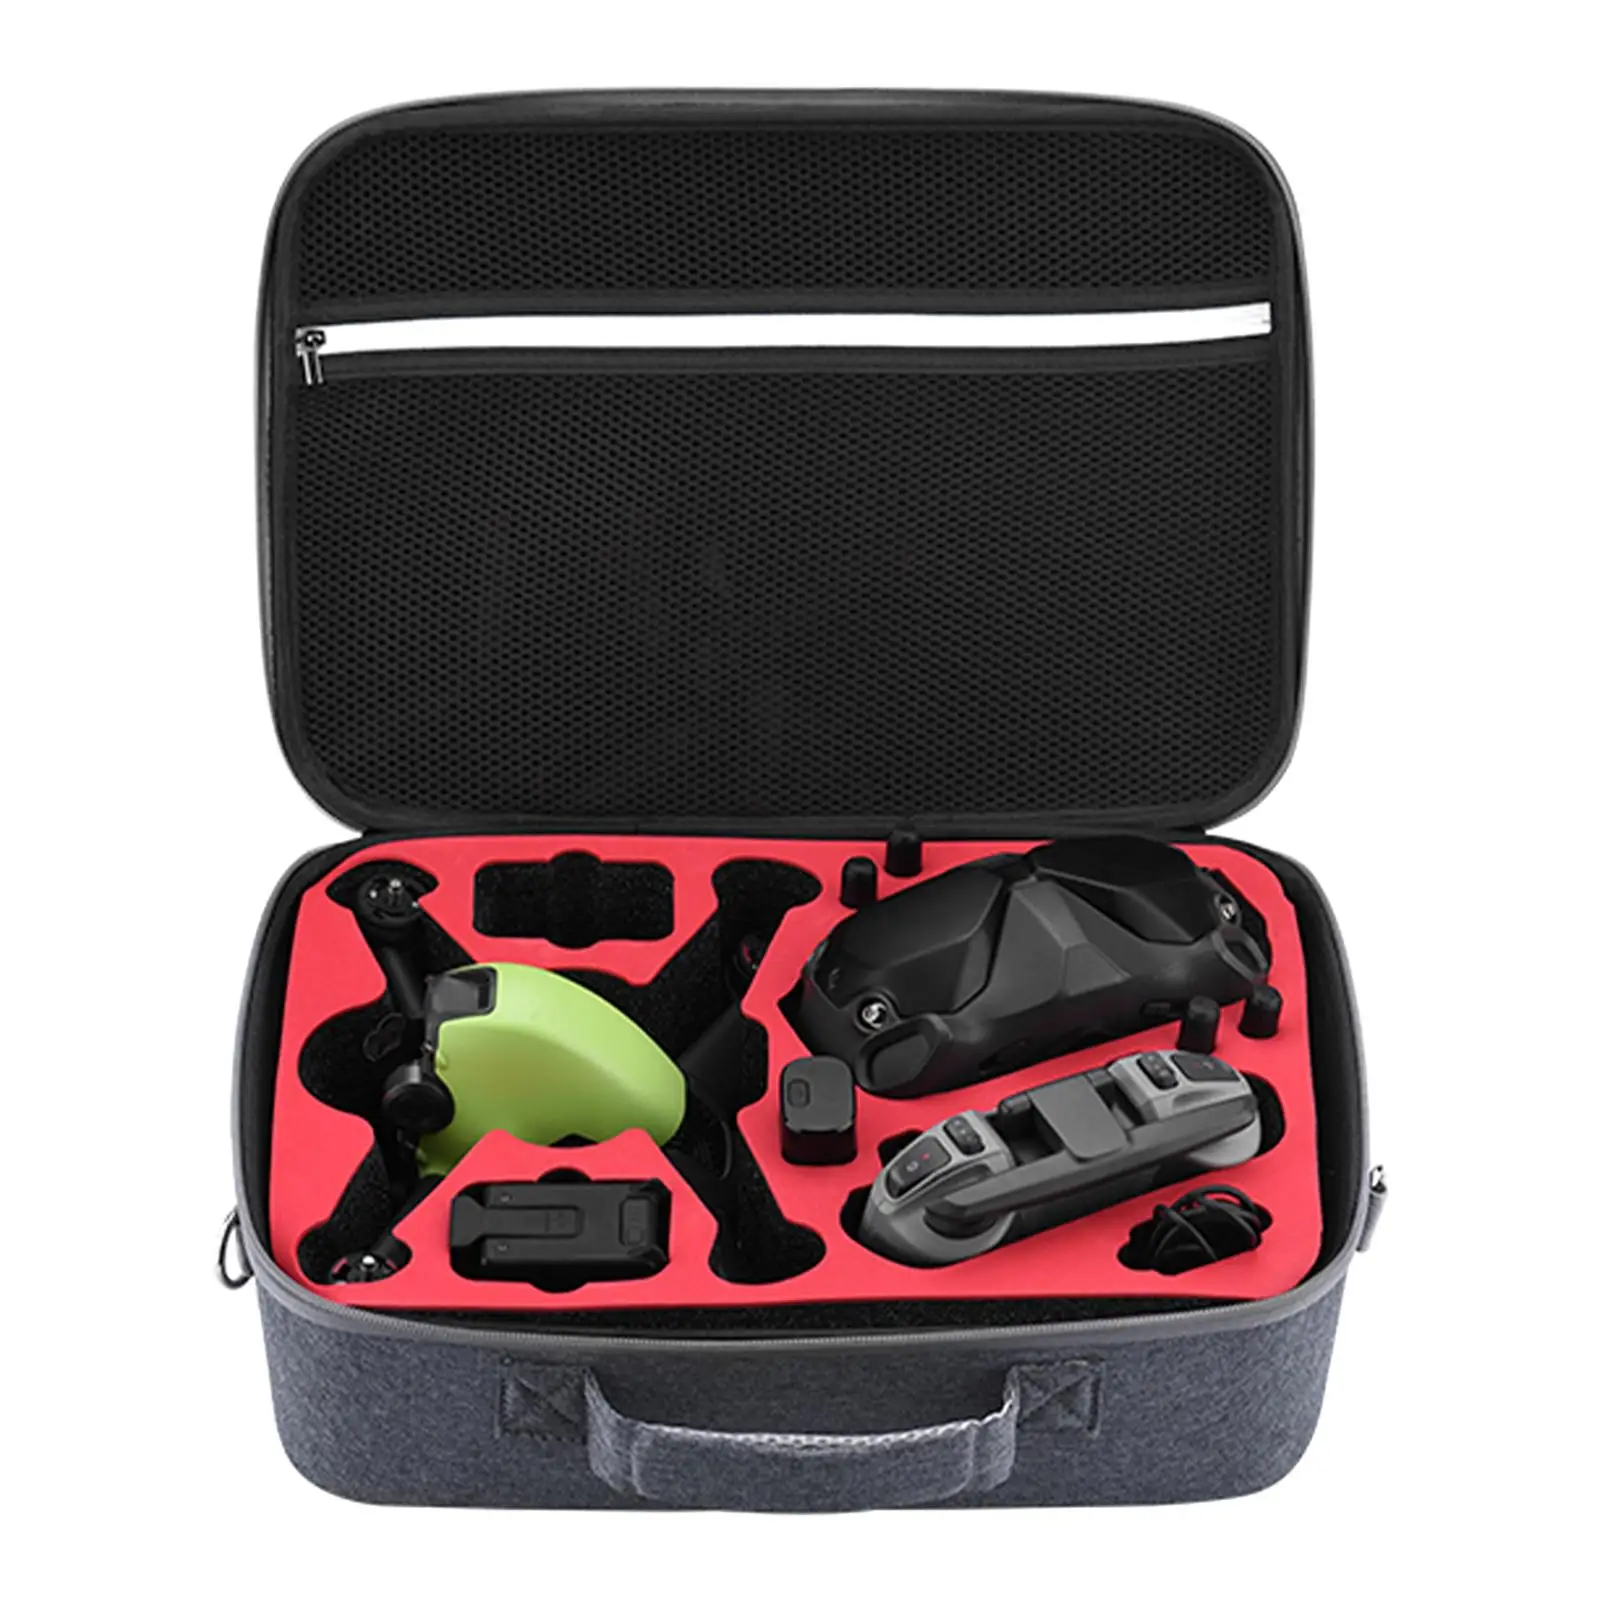 Portable  Storage Bag Shockproof Waterproof Carrying Case Handbag, for Combo Battery Accessories, Travel Bag